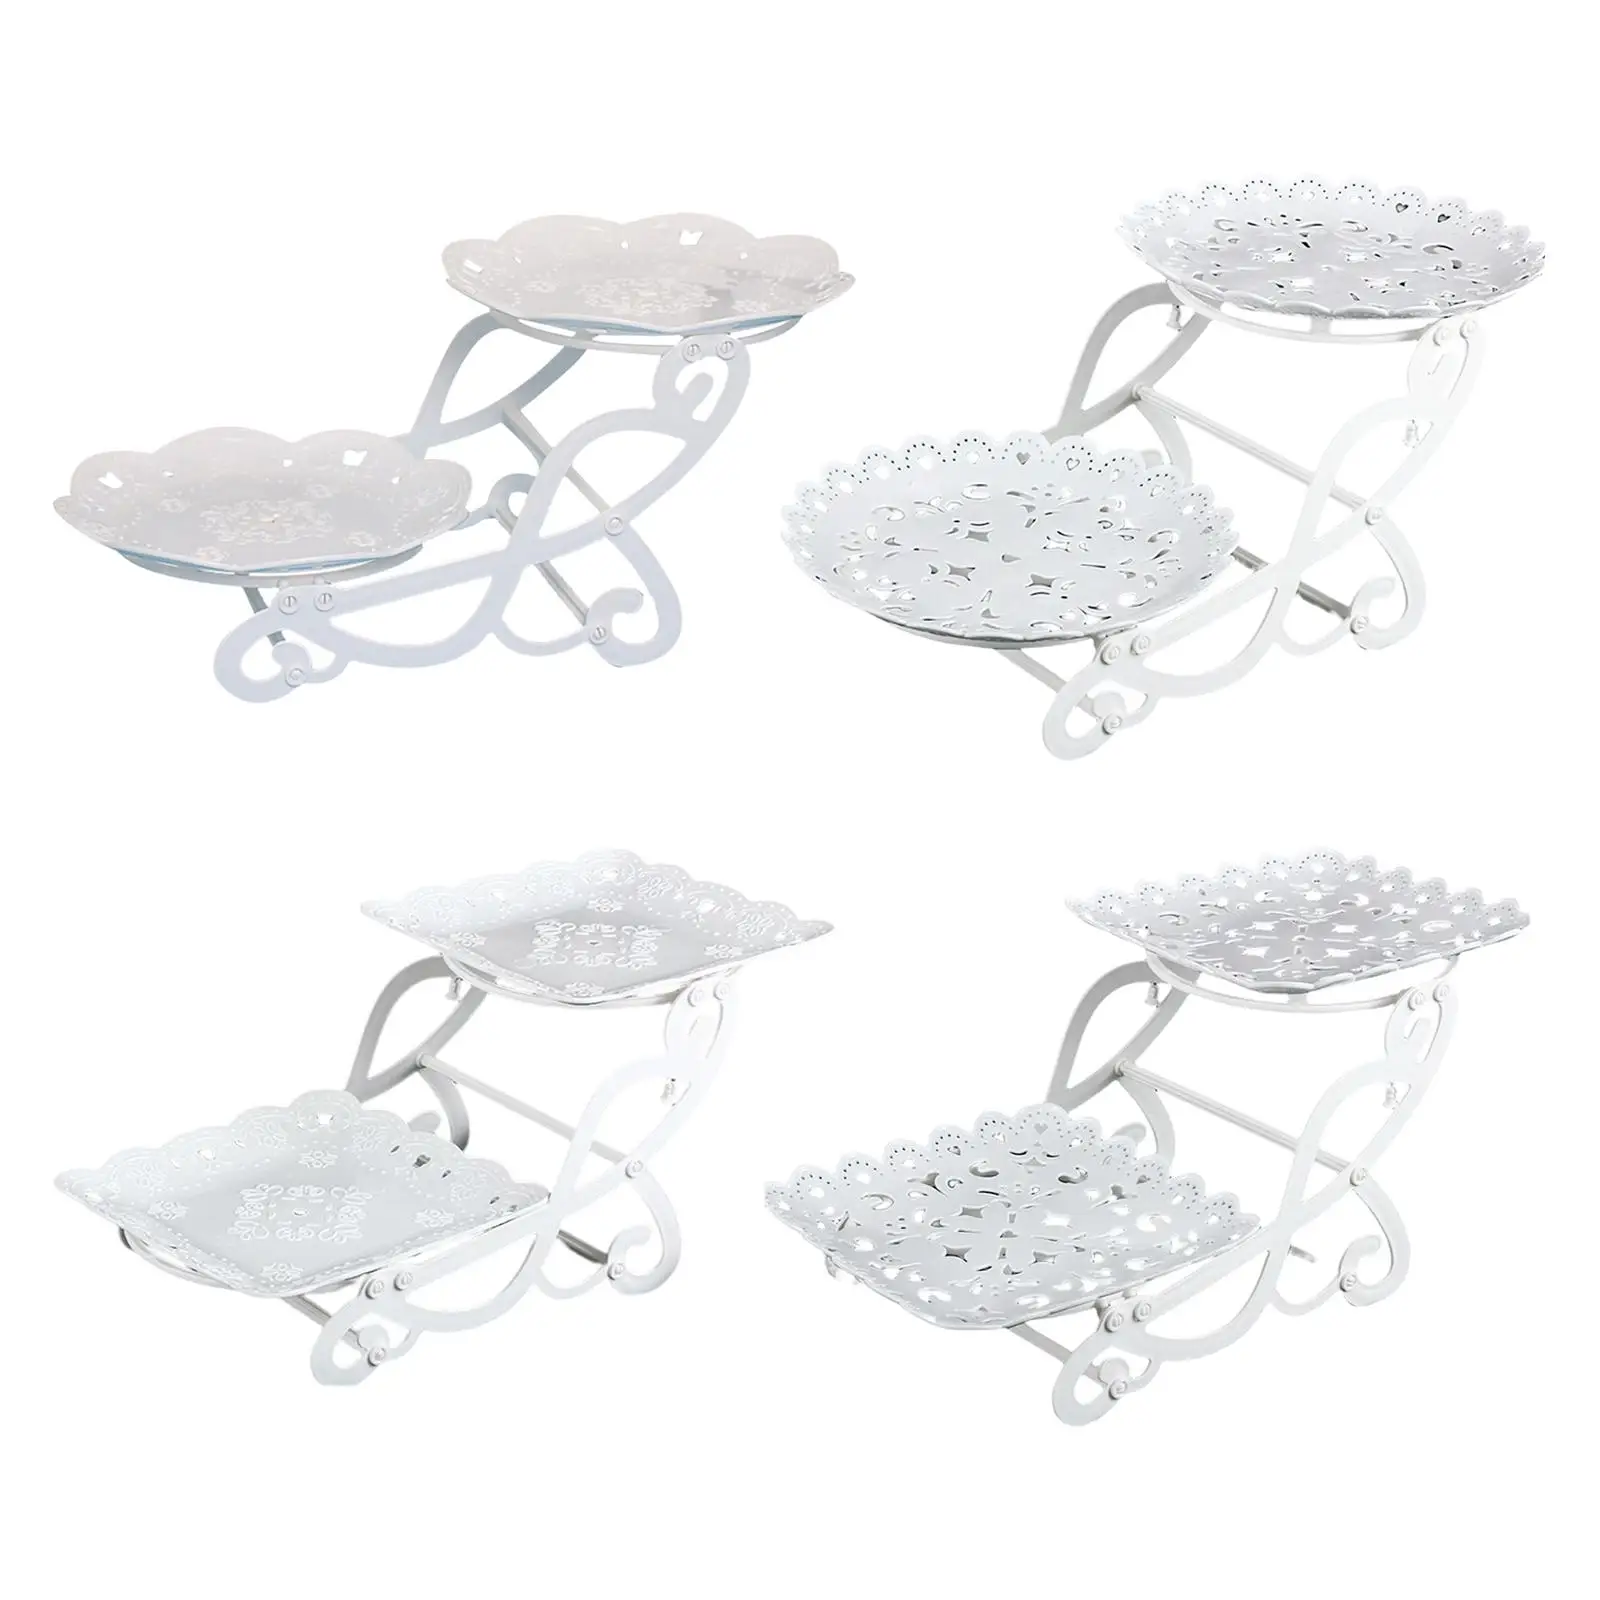 Cake Stand Dessert Serving Plate Appetizer Tray for Cupcake Afternoon Tea